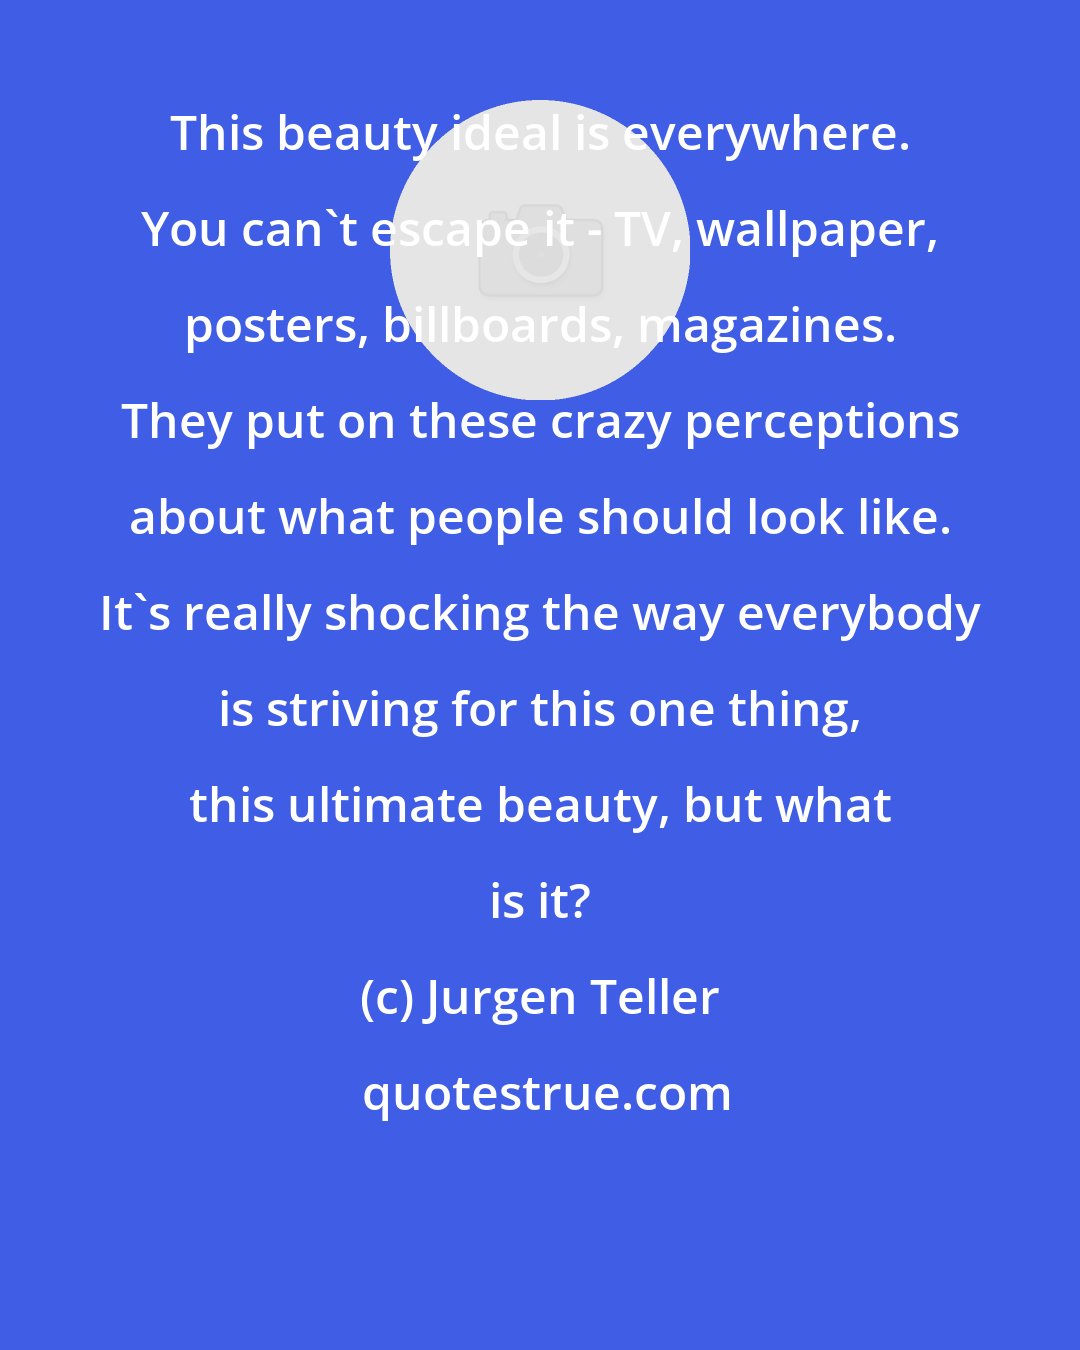 Jurgen Teller: This beauty ideal is everywhere. You can't escape it - TV, wallpaper, posters, billboards, magazines. They put on these crazy perceptions about what people should look like. It's really shocking the way everybody is striving for this one thing, this ultimate beauty, but what is it?